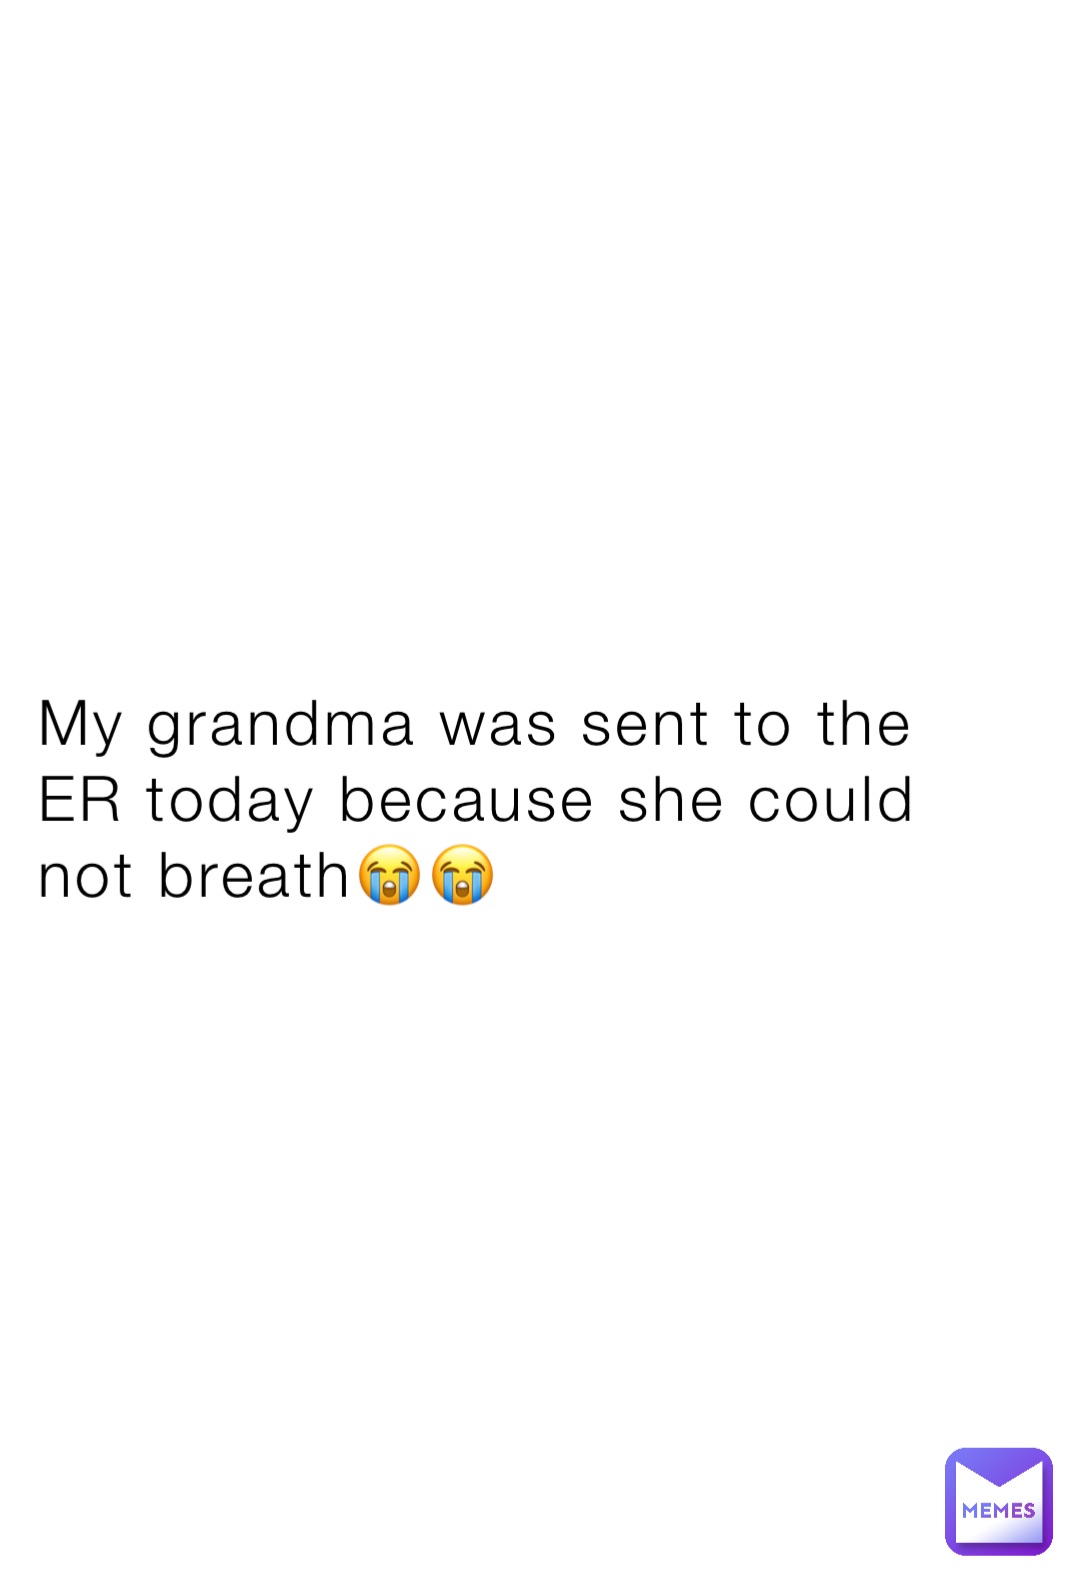 My grandma was sent to the ER today because she could not breath😭😭